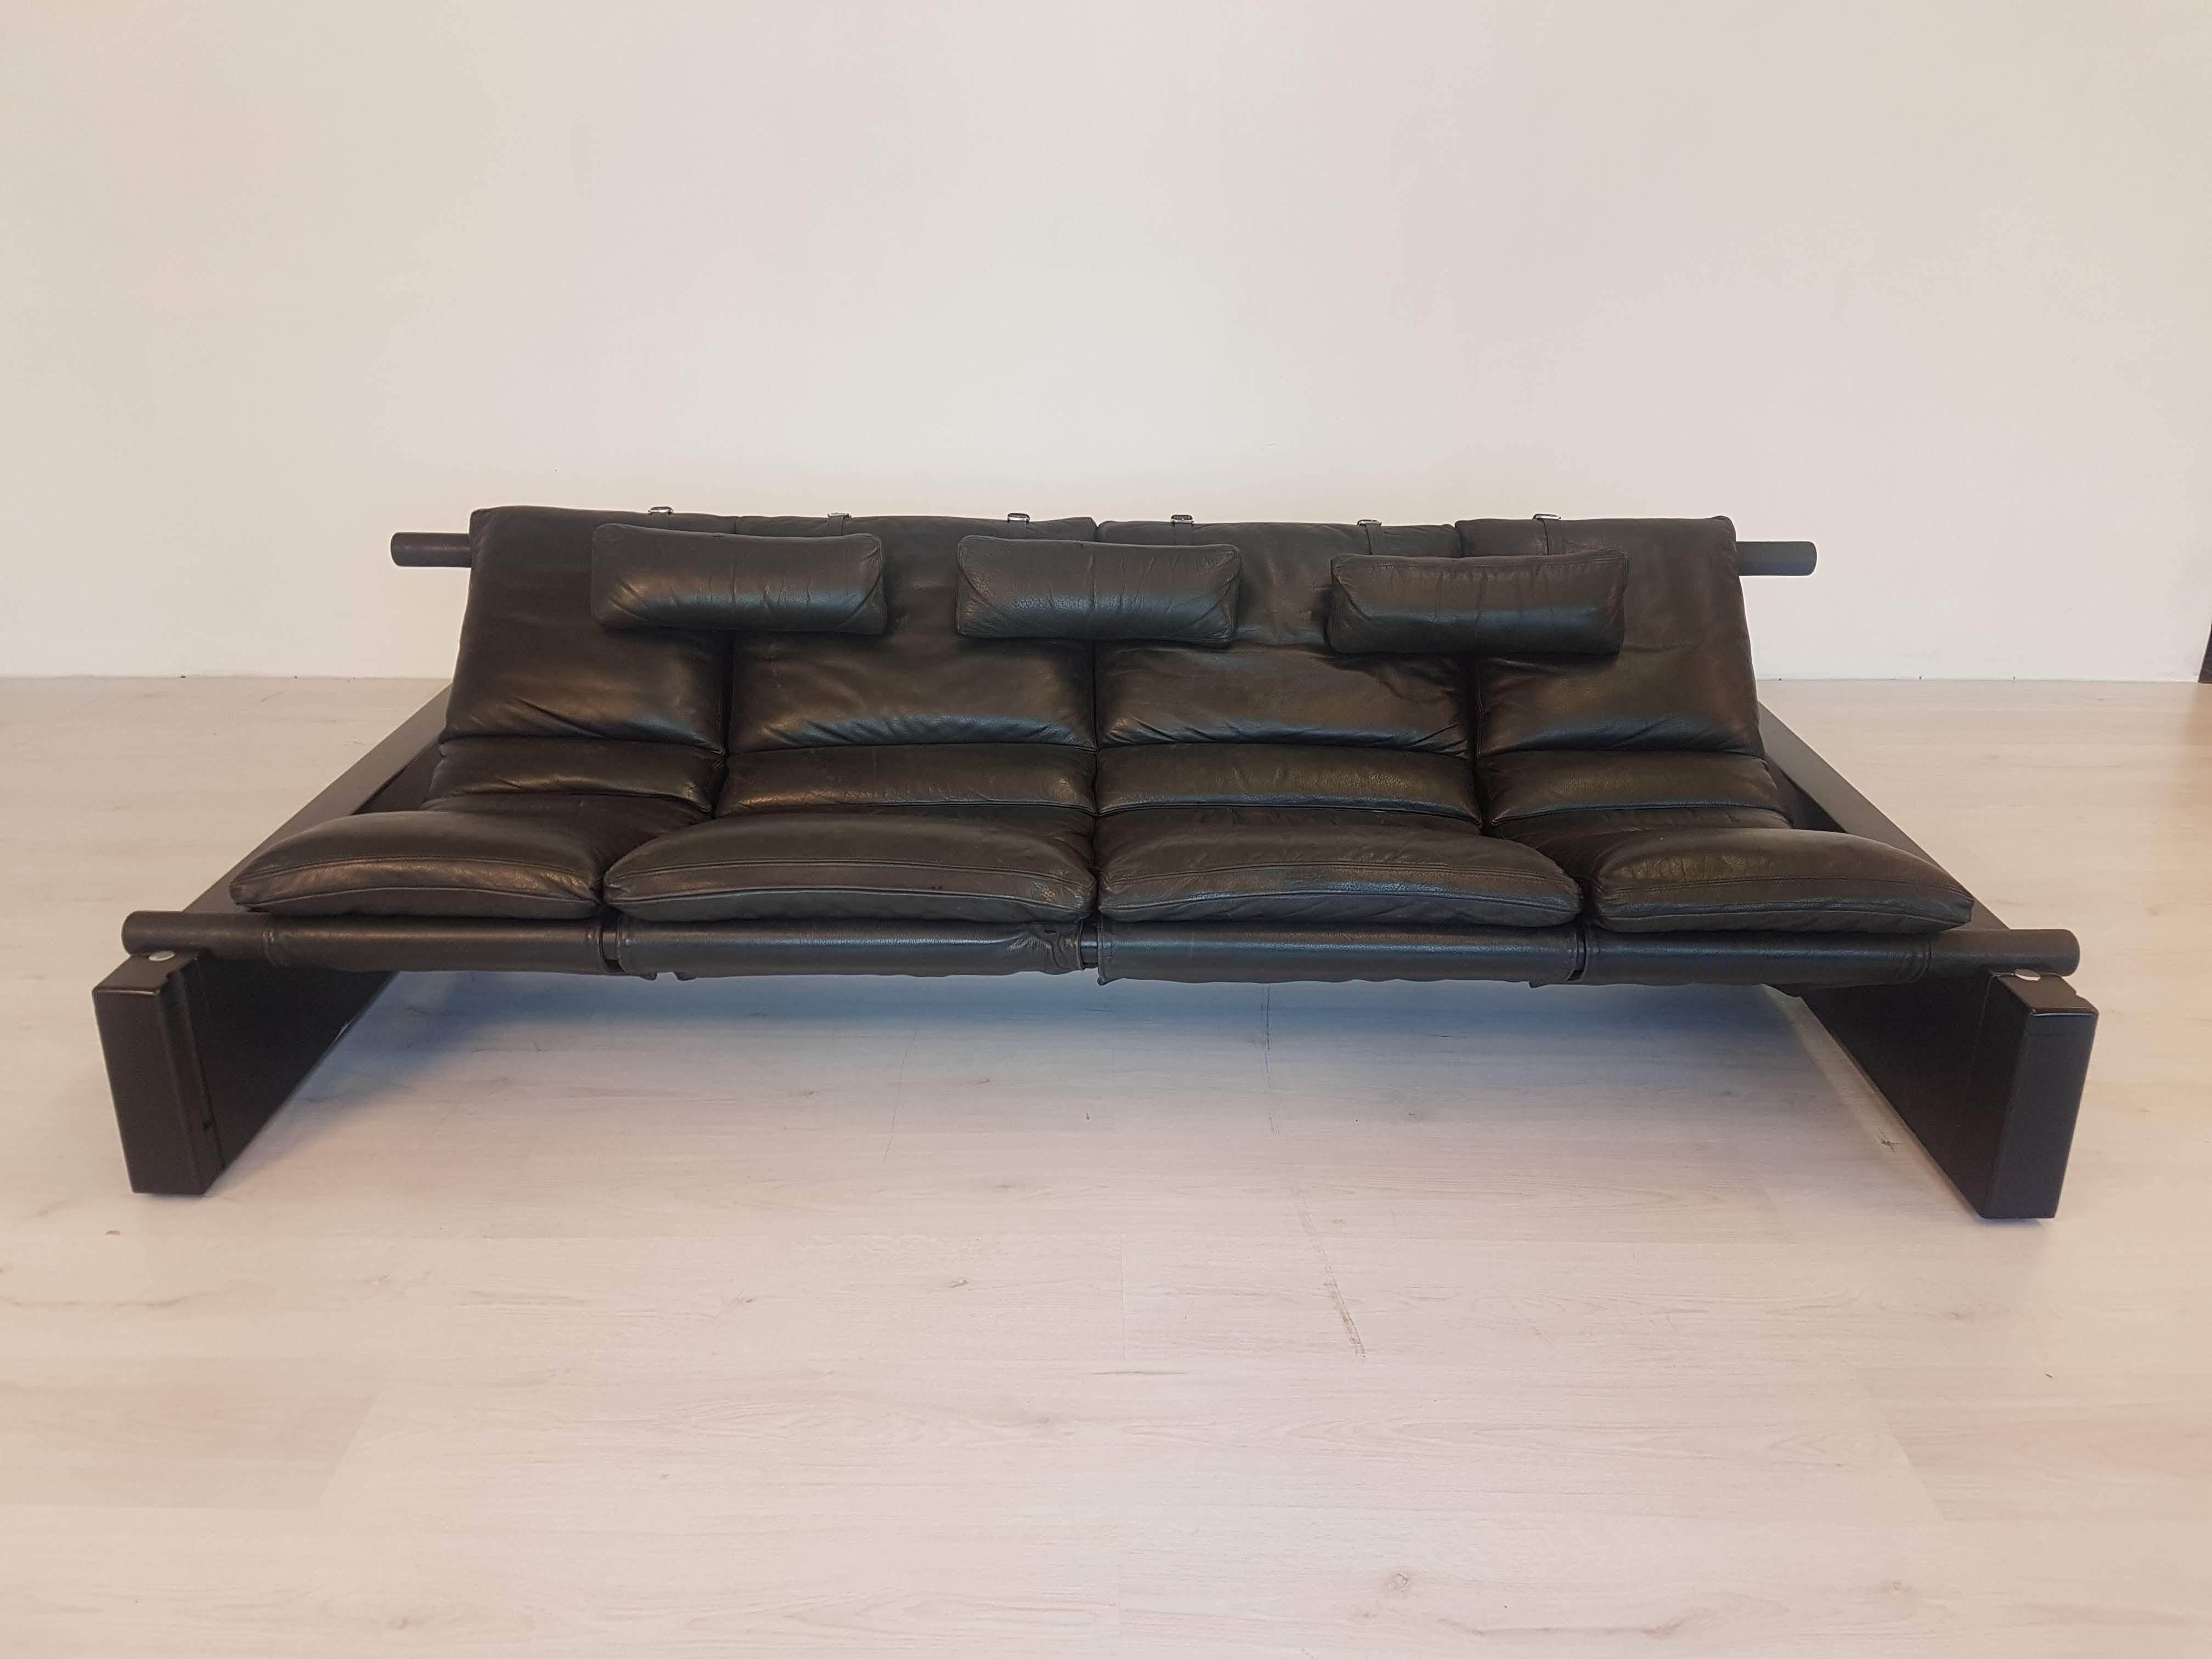 Daybed lounge sofa in black leather by Vittorio Mazzucioni for ICF De Padova 1970
Model 'Positiv' with Adjustable seating. A very comfortable piece with a nice patina.
Would fit well in a Brutalist inspired interior.

 